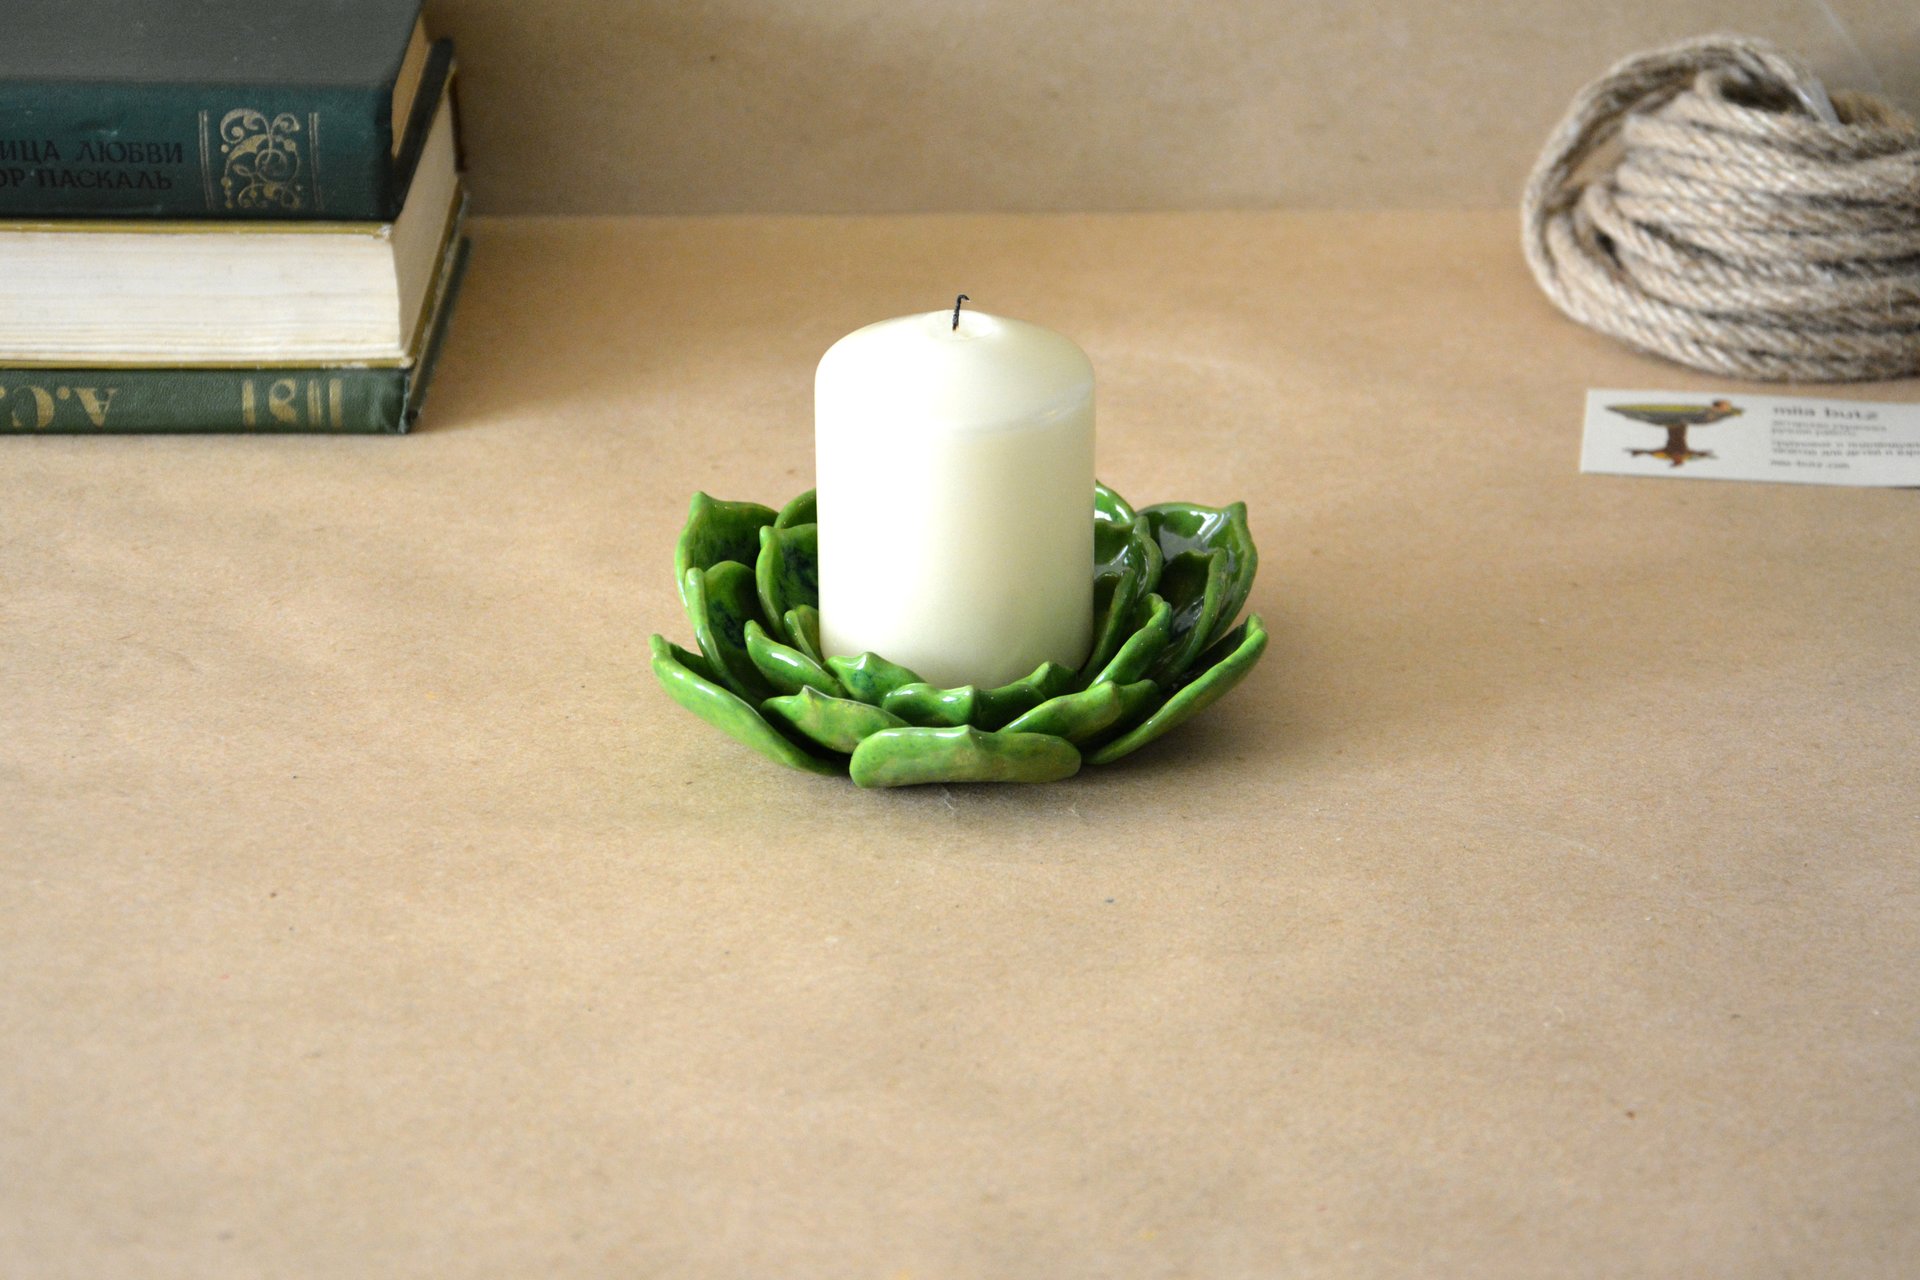 Light green candle holder a Succulent - Ceramic Candl-holders, diameter - 14 cm, photo 4 of 4.